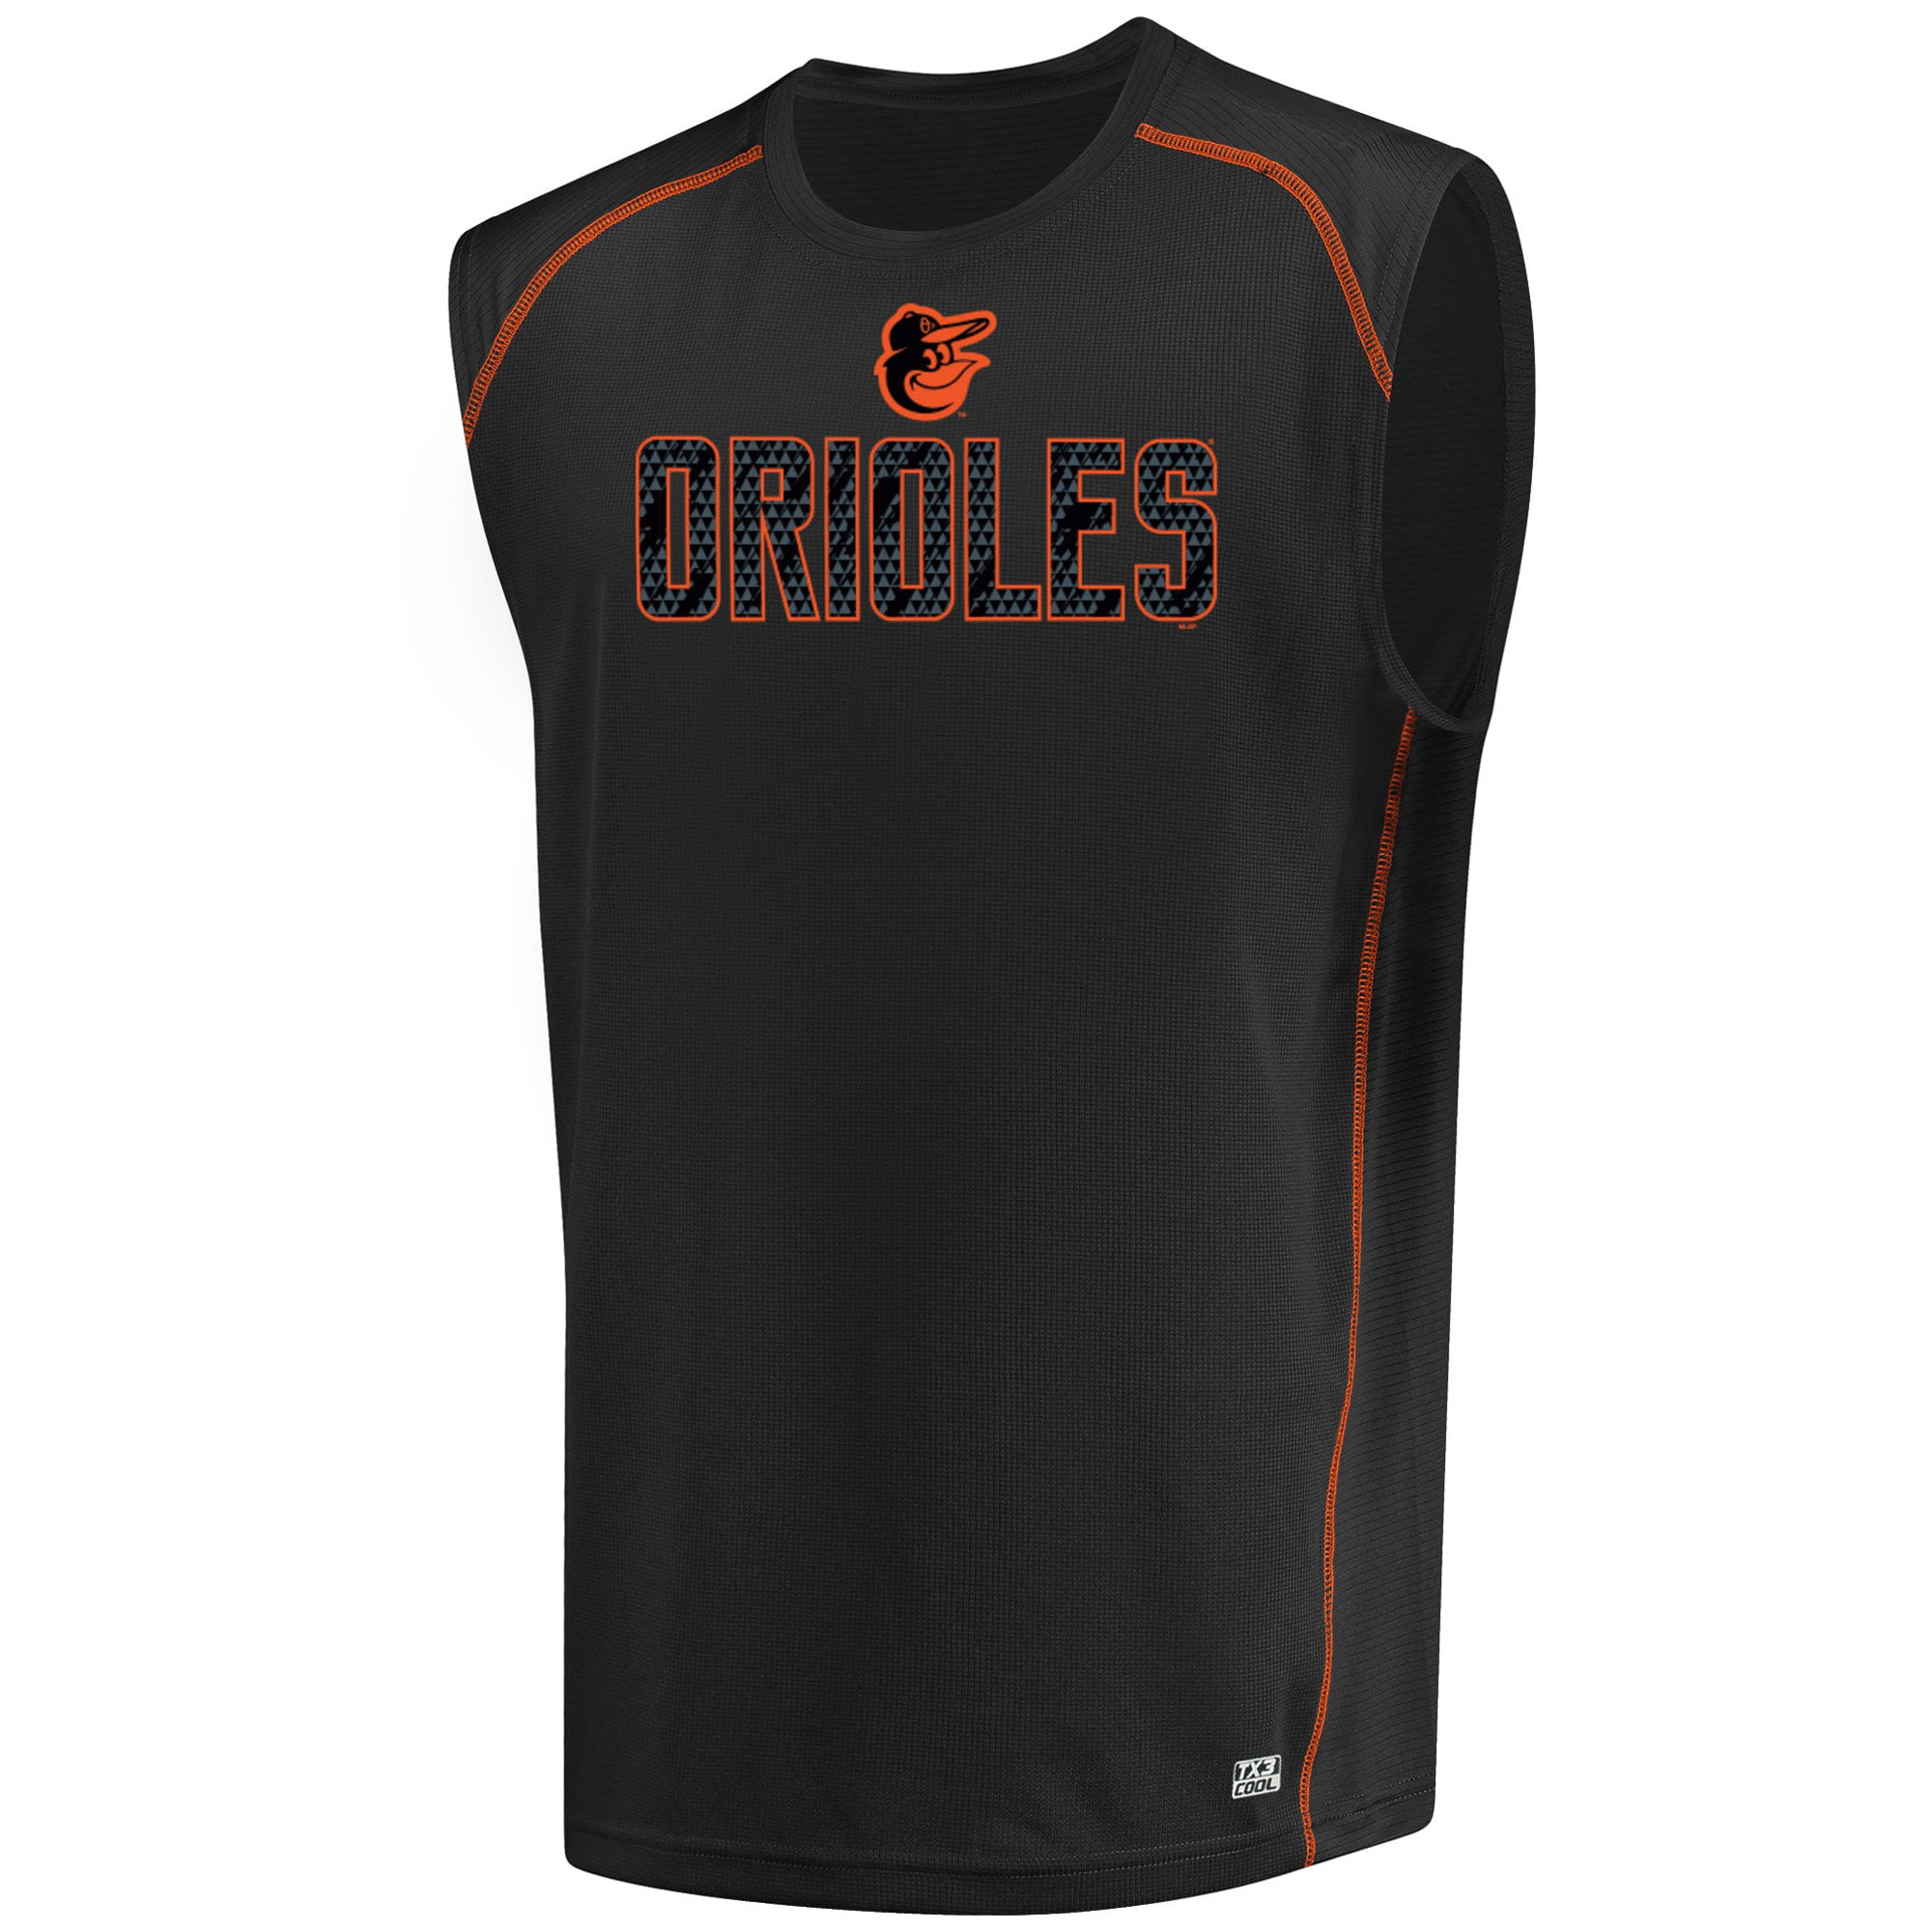 Baltimore Orioles MLB Majestic Men's Big & Tall Muscle Shirt